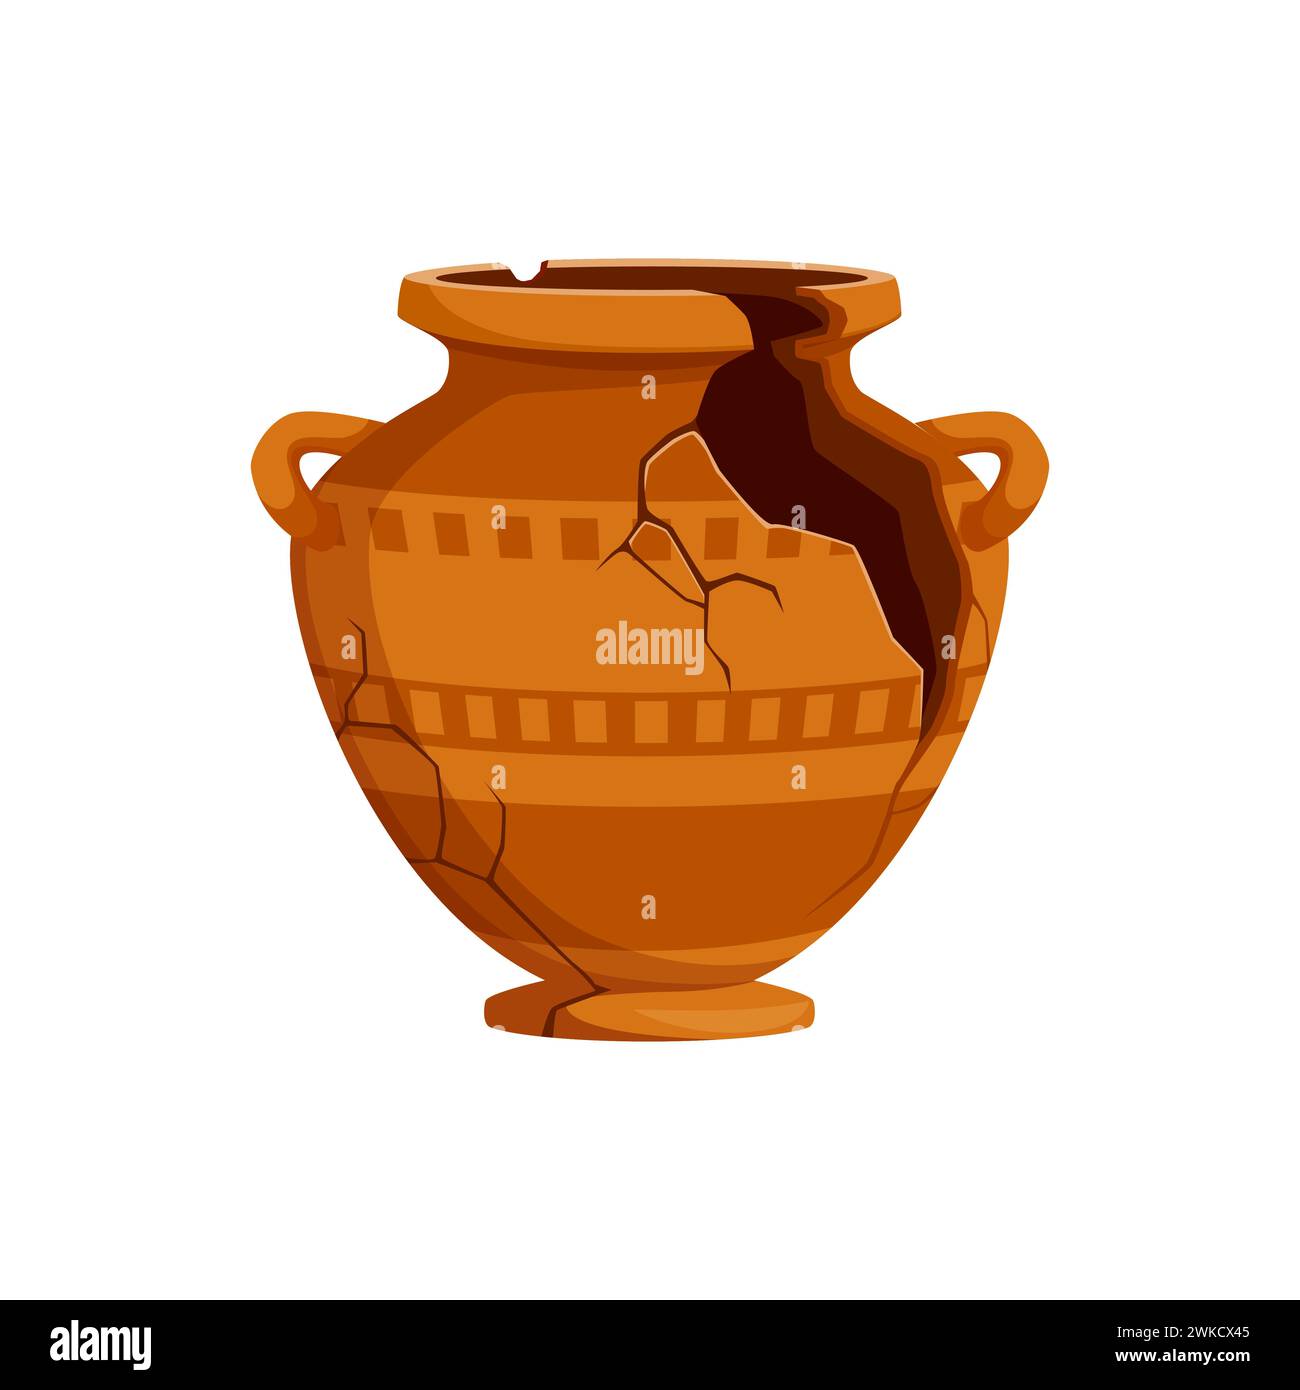 Ancient vase or broken pottery pot, antique ceramic cracked bowl with handles, isolated vector. Roman or Greek archeological earthenware with antique ornament on cracked pieces of amphora vase Stock Vector